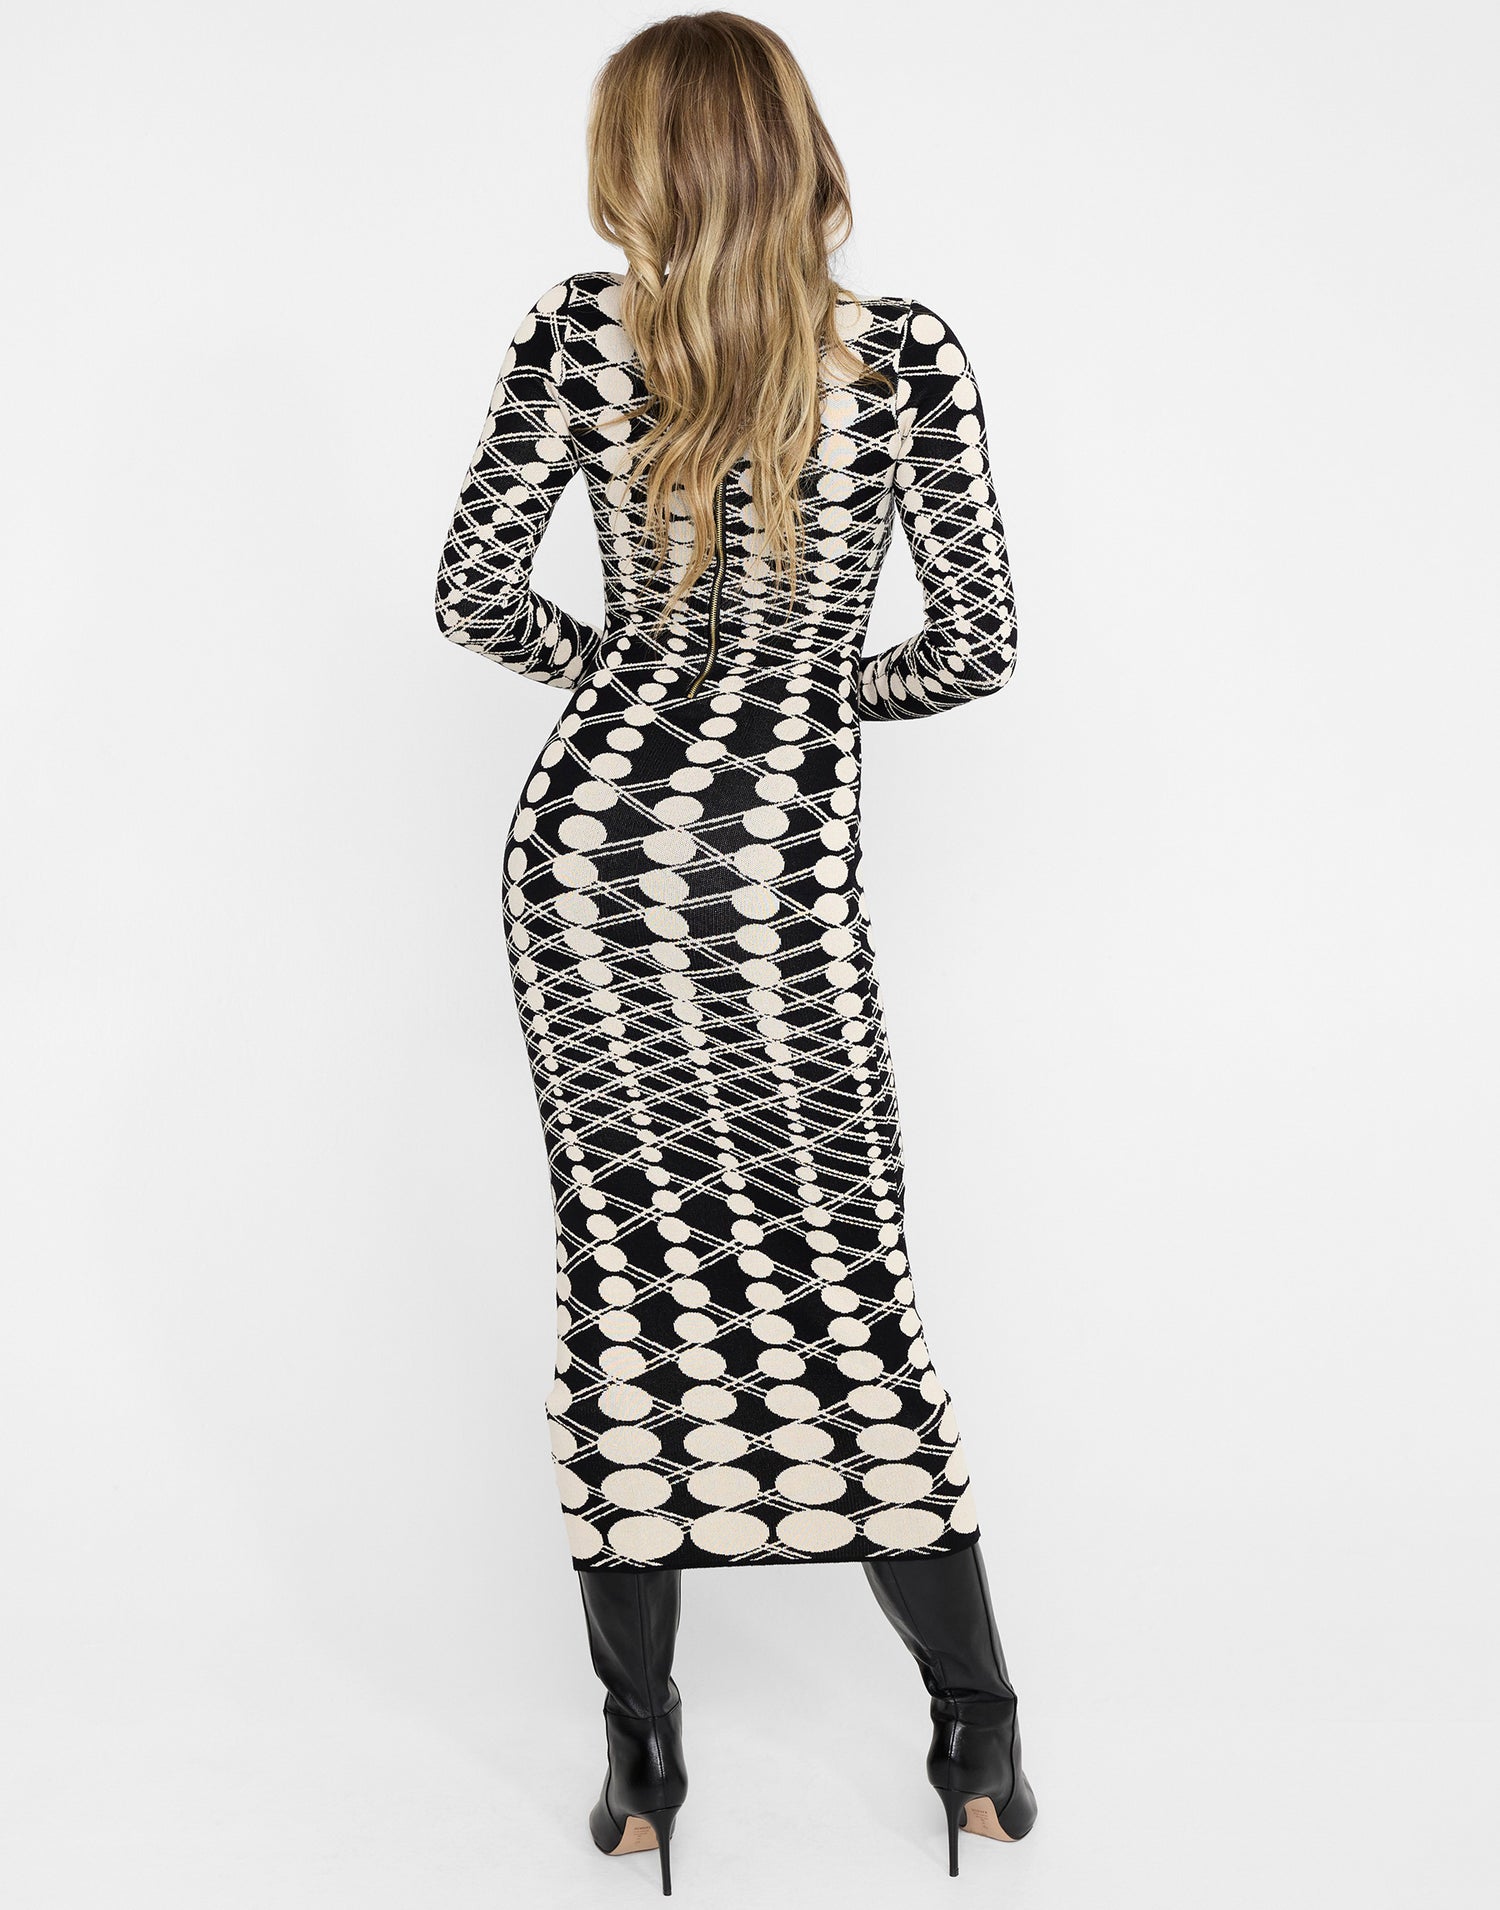 Quincy Midi Dress by Summer Haus in Black/Cream - Back View